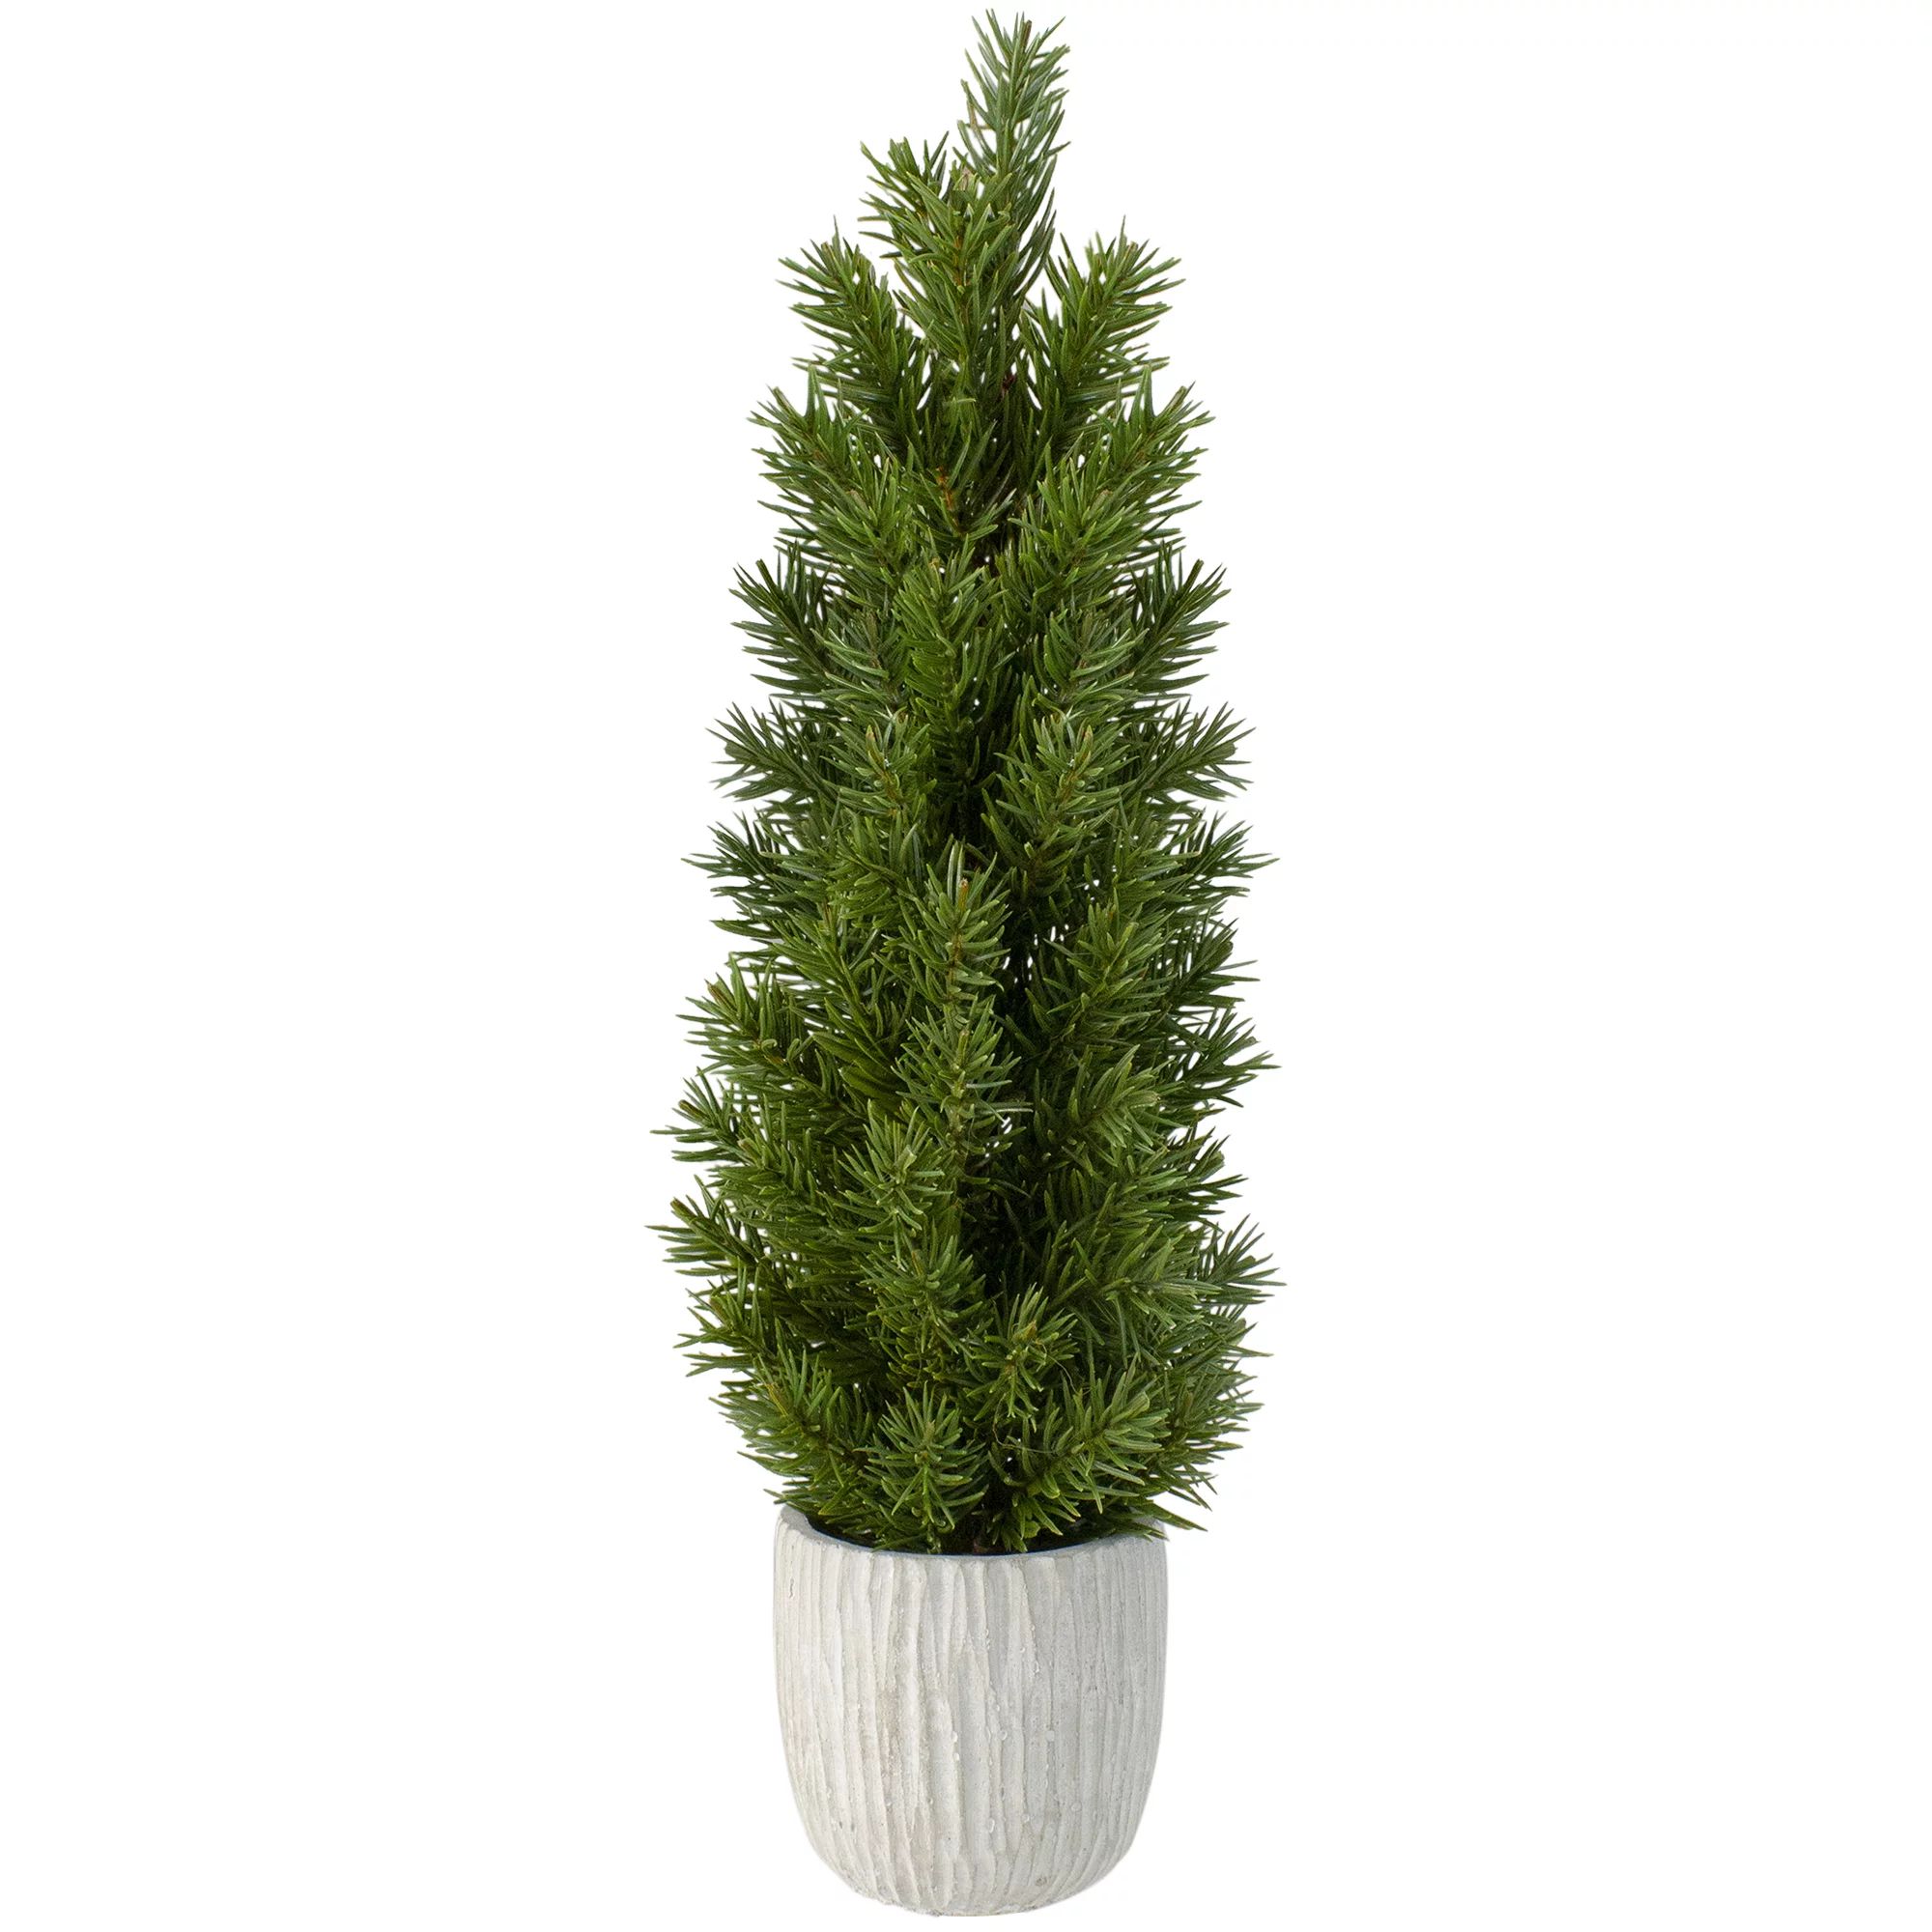 Northlight Assorted Color Potted Pine Christmas Tree, 1" | Walmart (US)